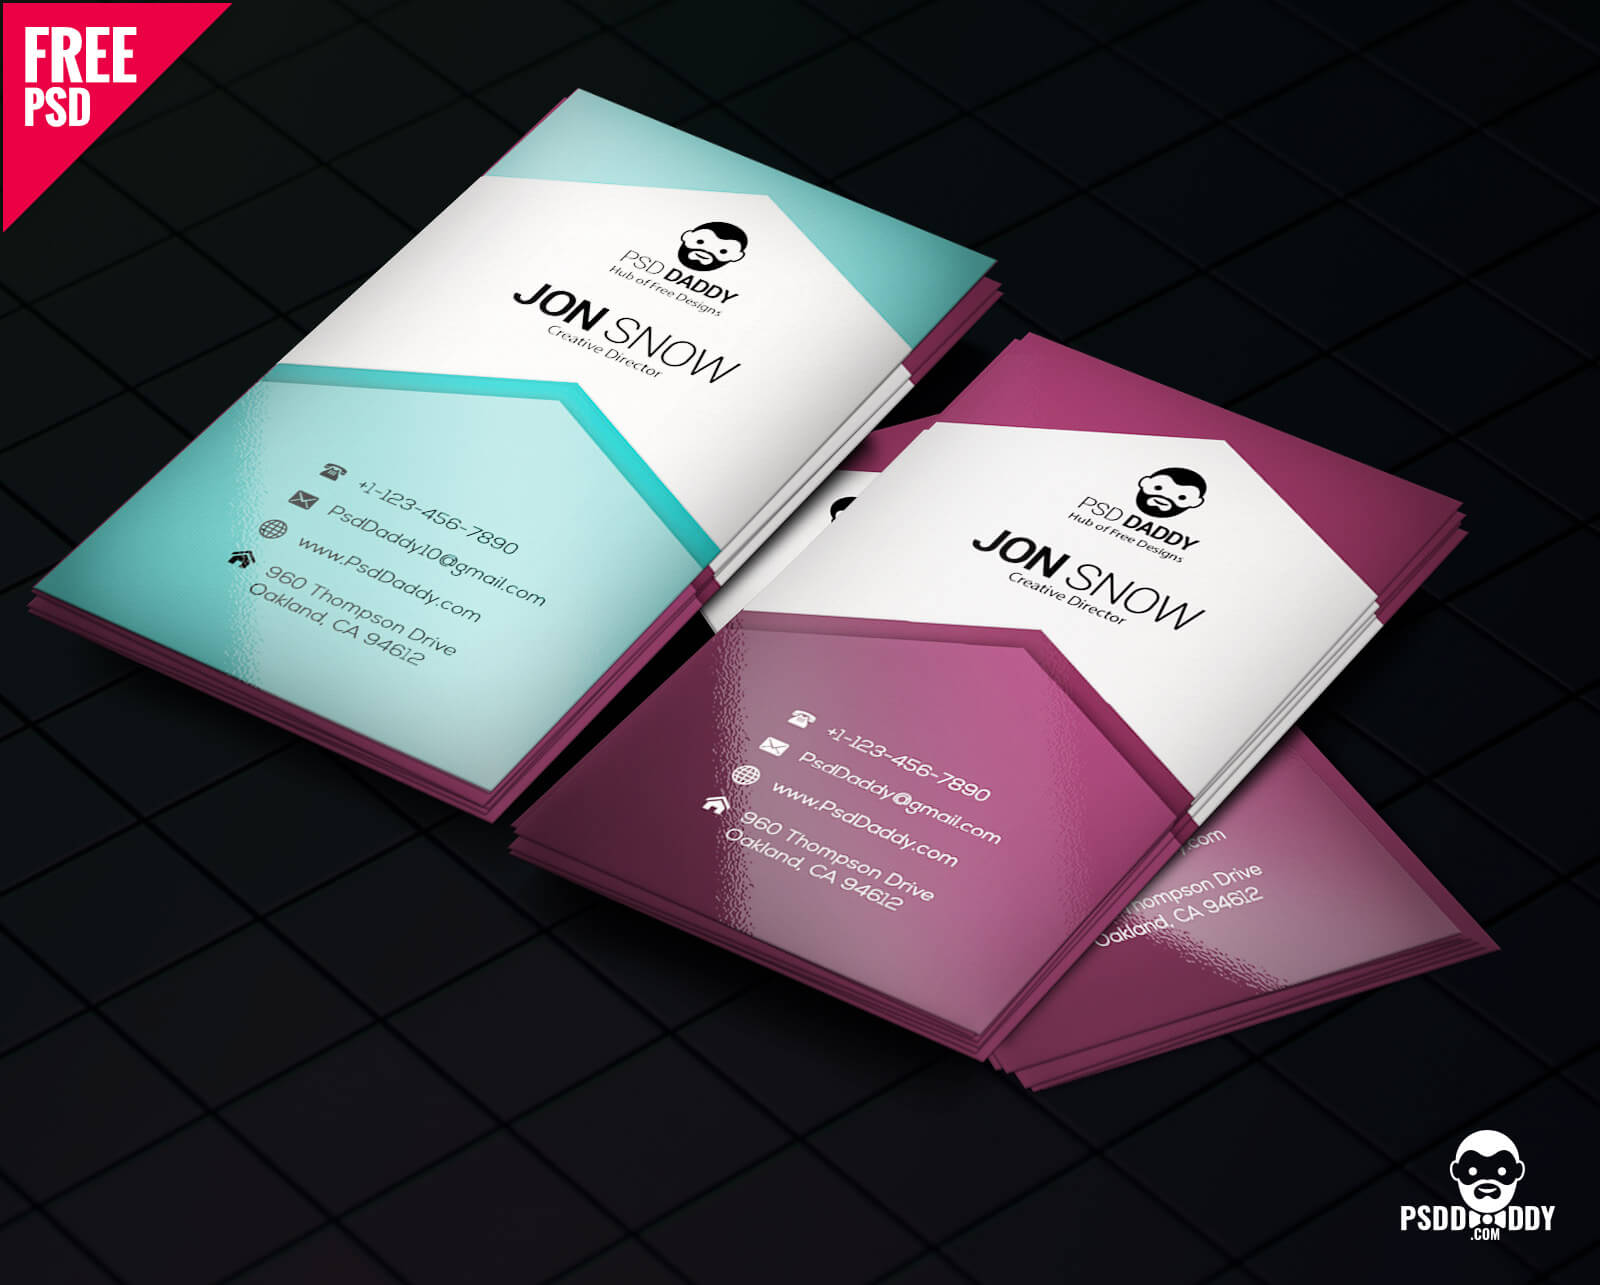 Download]Creative Business Card Psd Free | Psddaddy Inside Business Card Size Psd Template